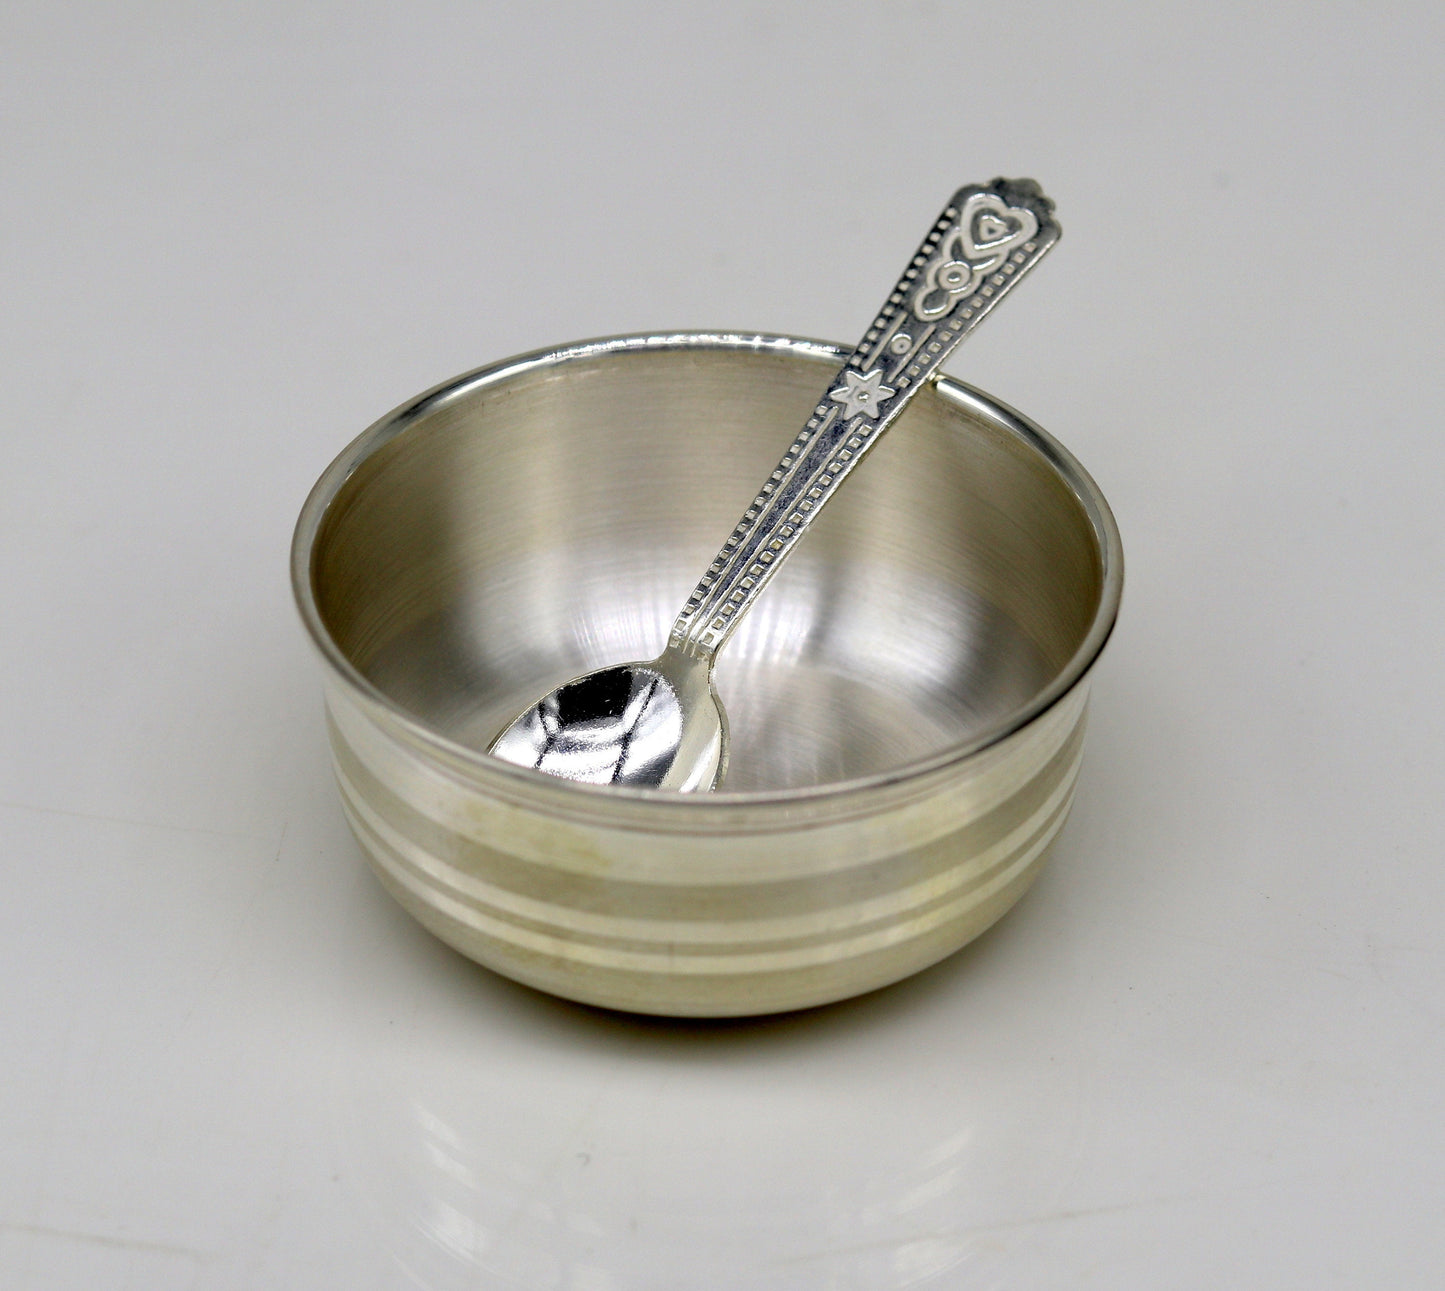 999 fine silver handmade bowl and spoon set, silver has antibacterial properties,stay baby/kids healthy, silver vessels utensils sv48 - TRIBAL ORNAMENTS